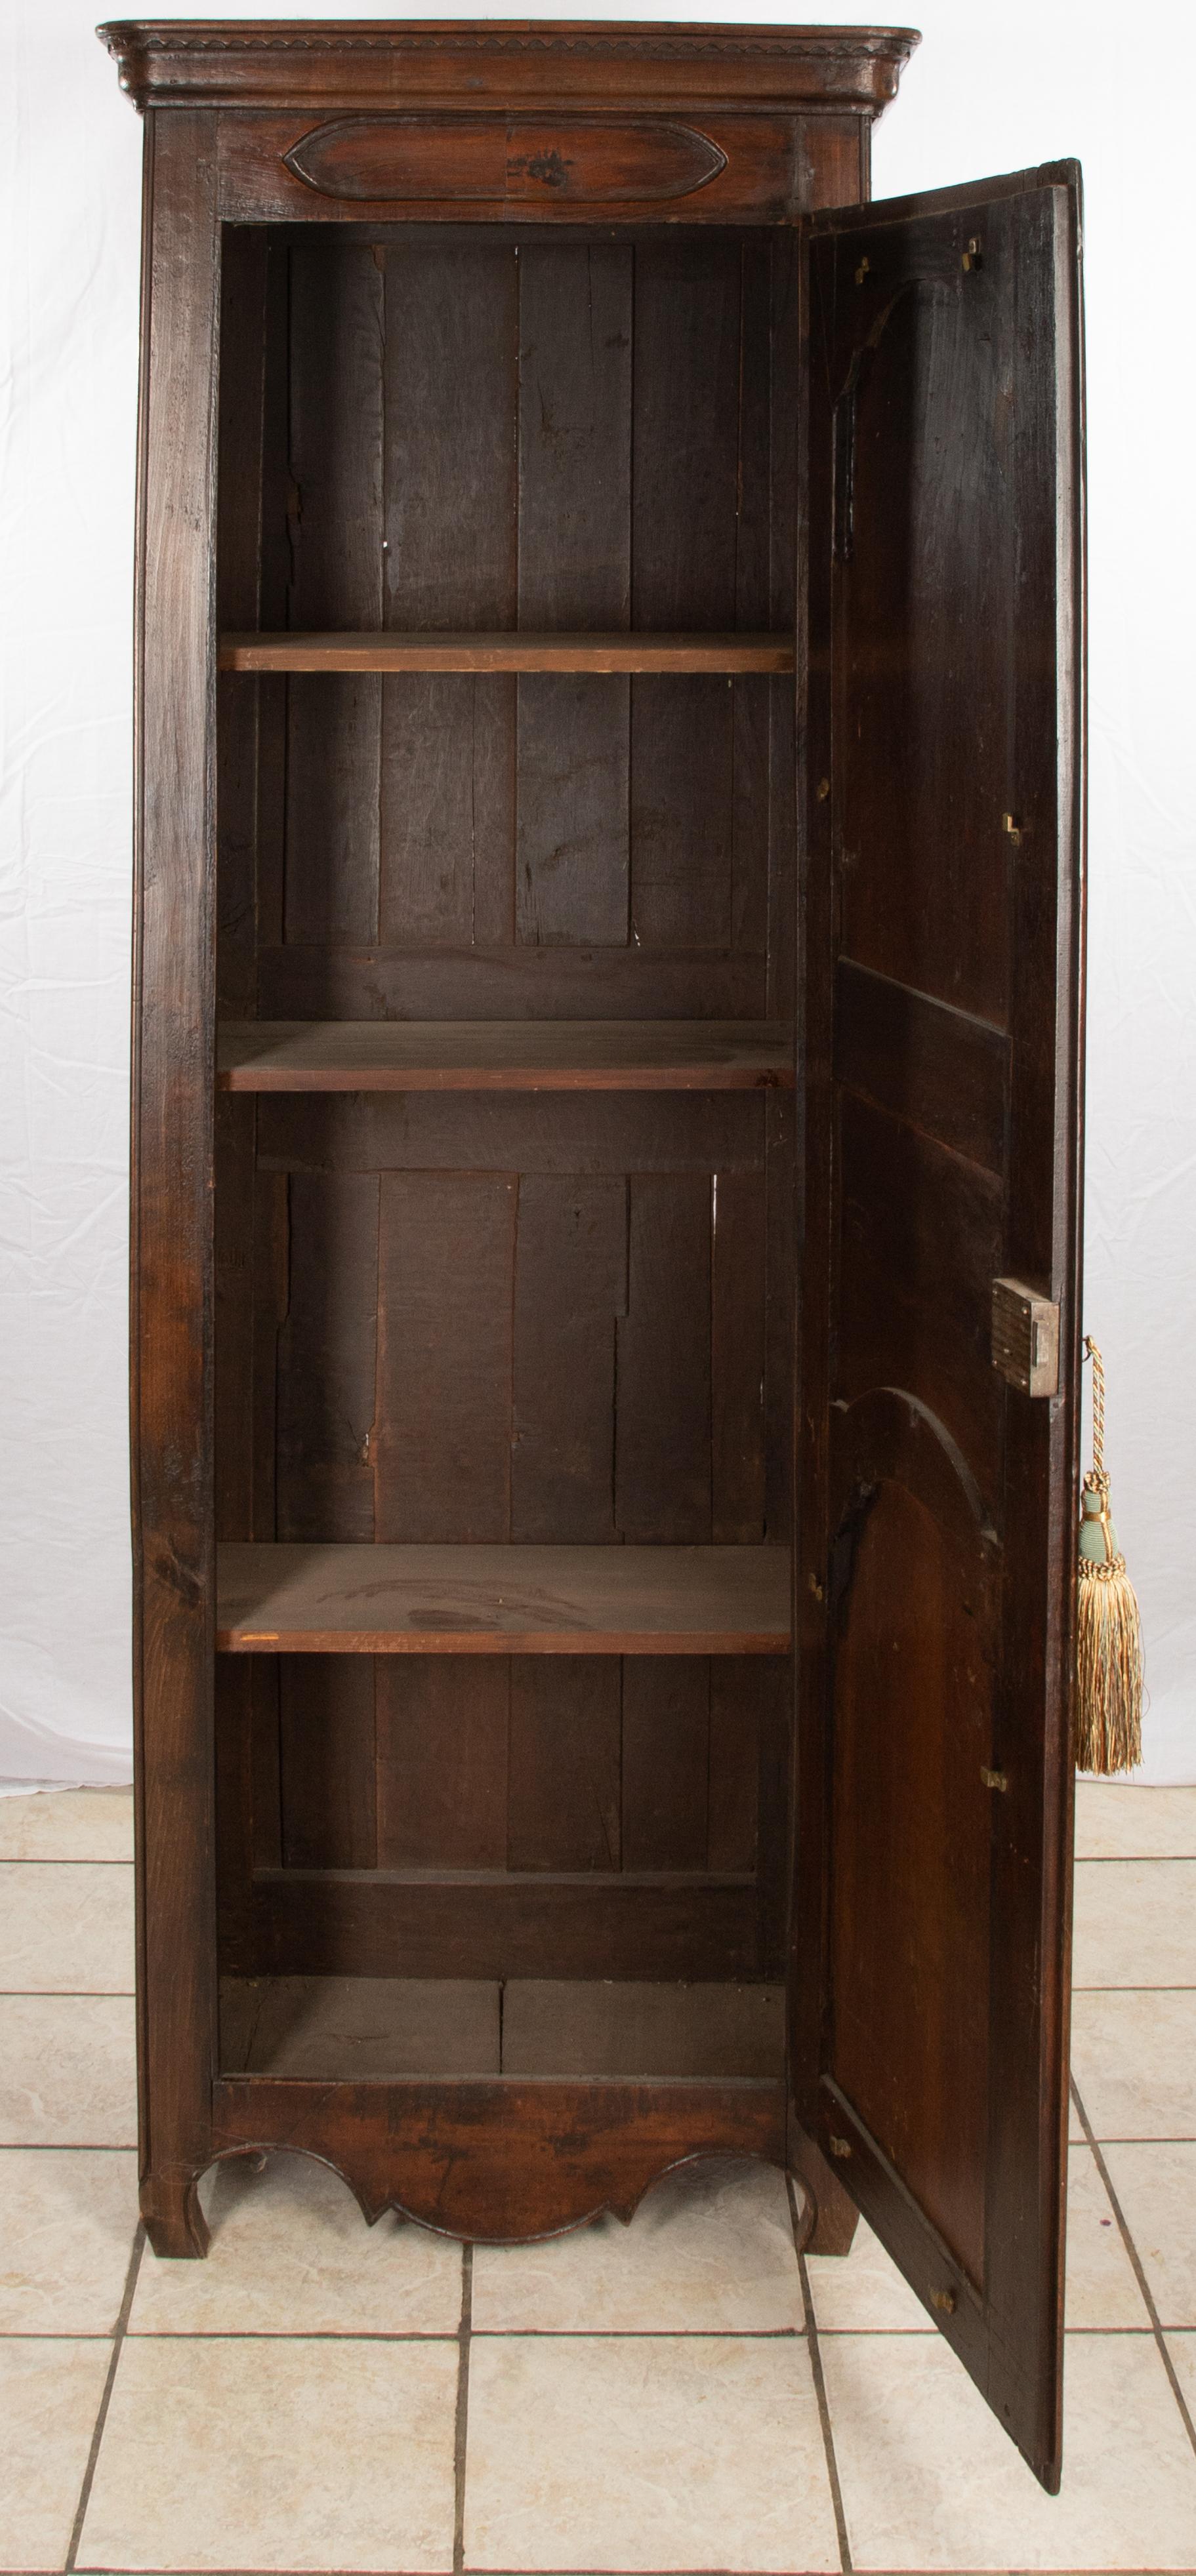 Offering this magnificent single door French walnut armoire. Very simple lines make this a standout piece. Stained in a dark tone. It is a narrow and tall piece.